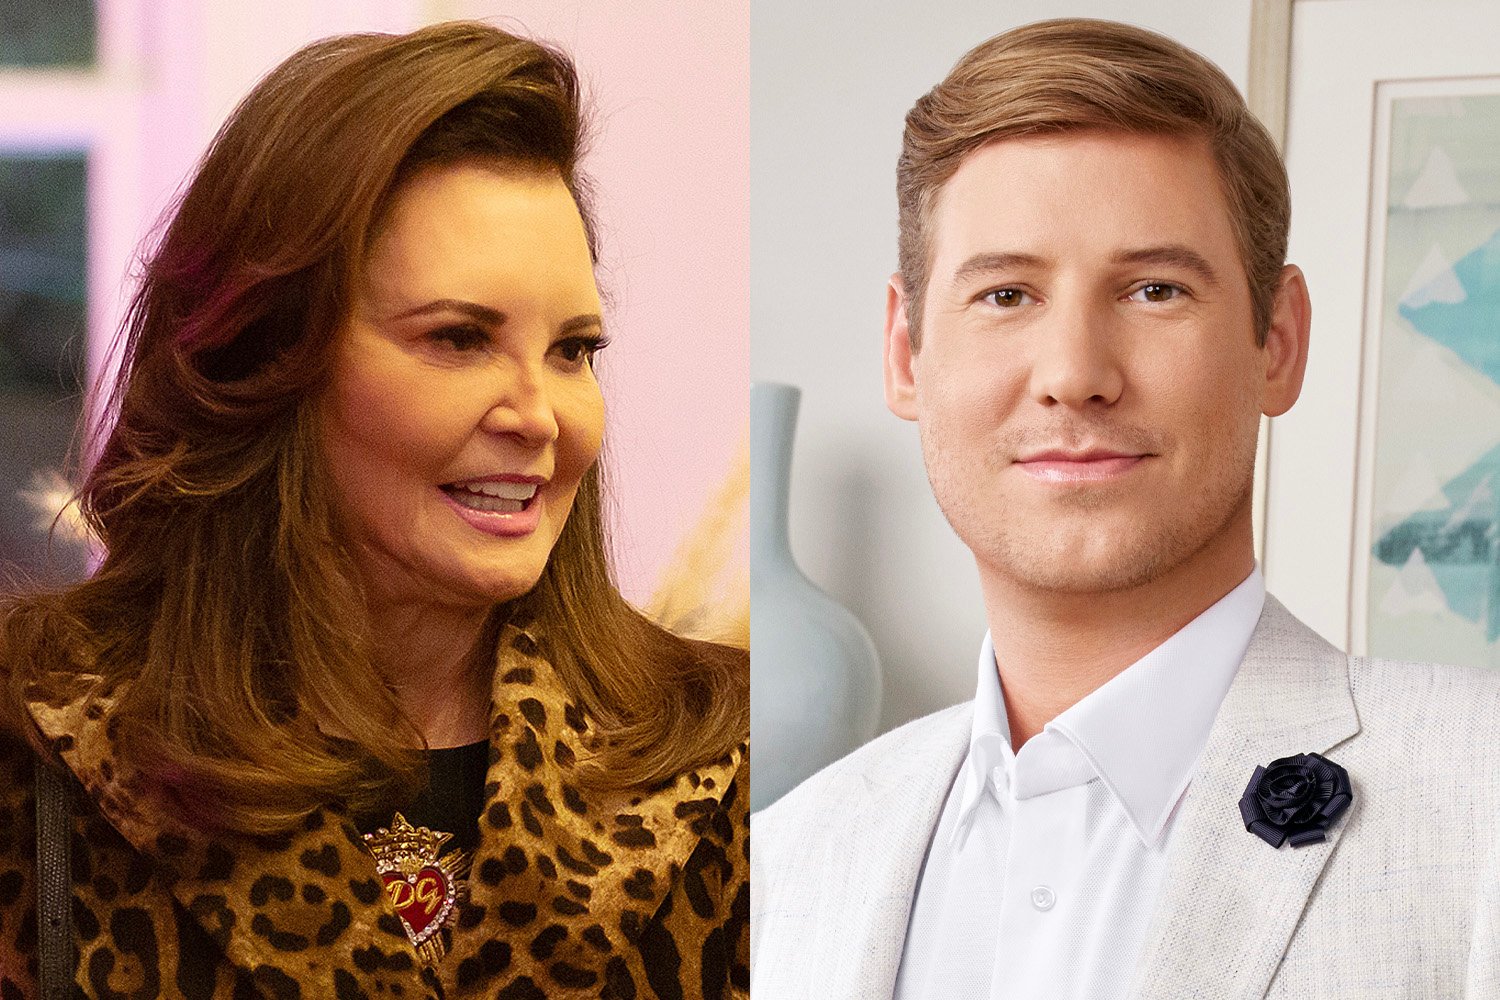 ‘Southern Charm’: Patricia Altschul Claps Back at Austen Kroll After He Says She Only Married for Money